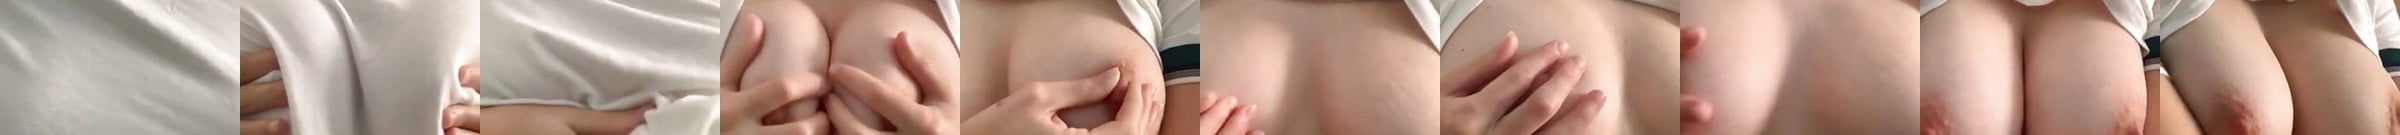 Nipples Pinching And Pulling Playing With My Tits Porn 4b